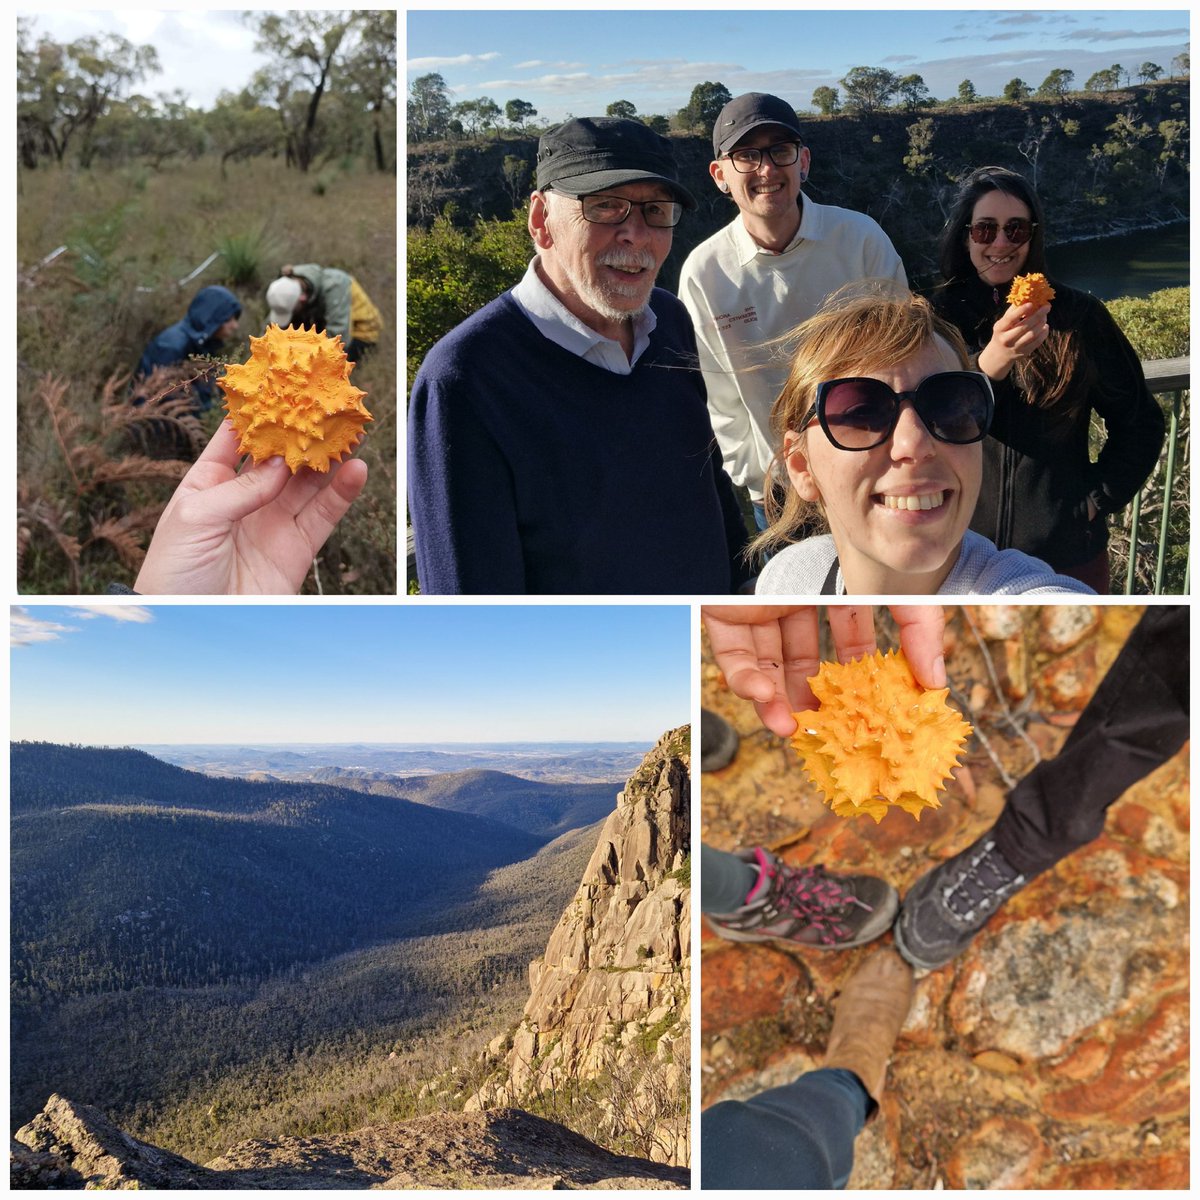 A travelling yam daisy #pollen grain and a rare sighting of Pope Kershaw. Key elements of a successful field expedition to southeastern #Australia!